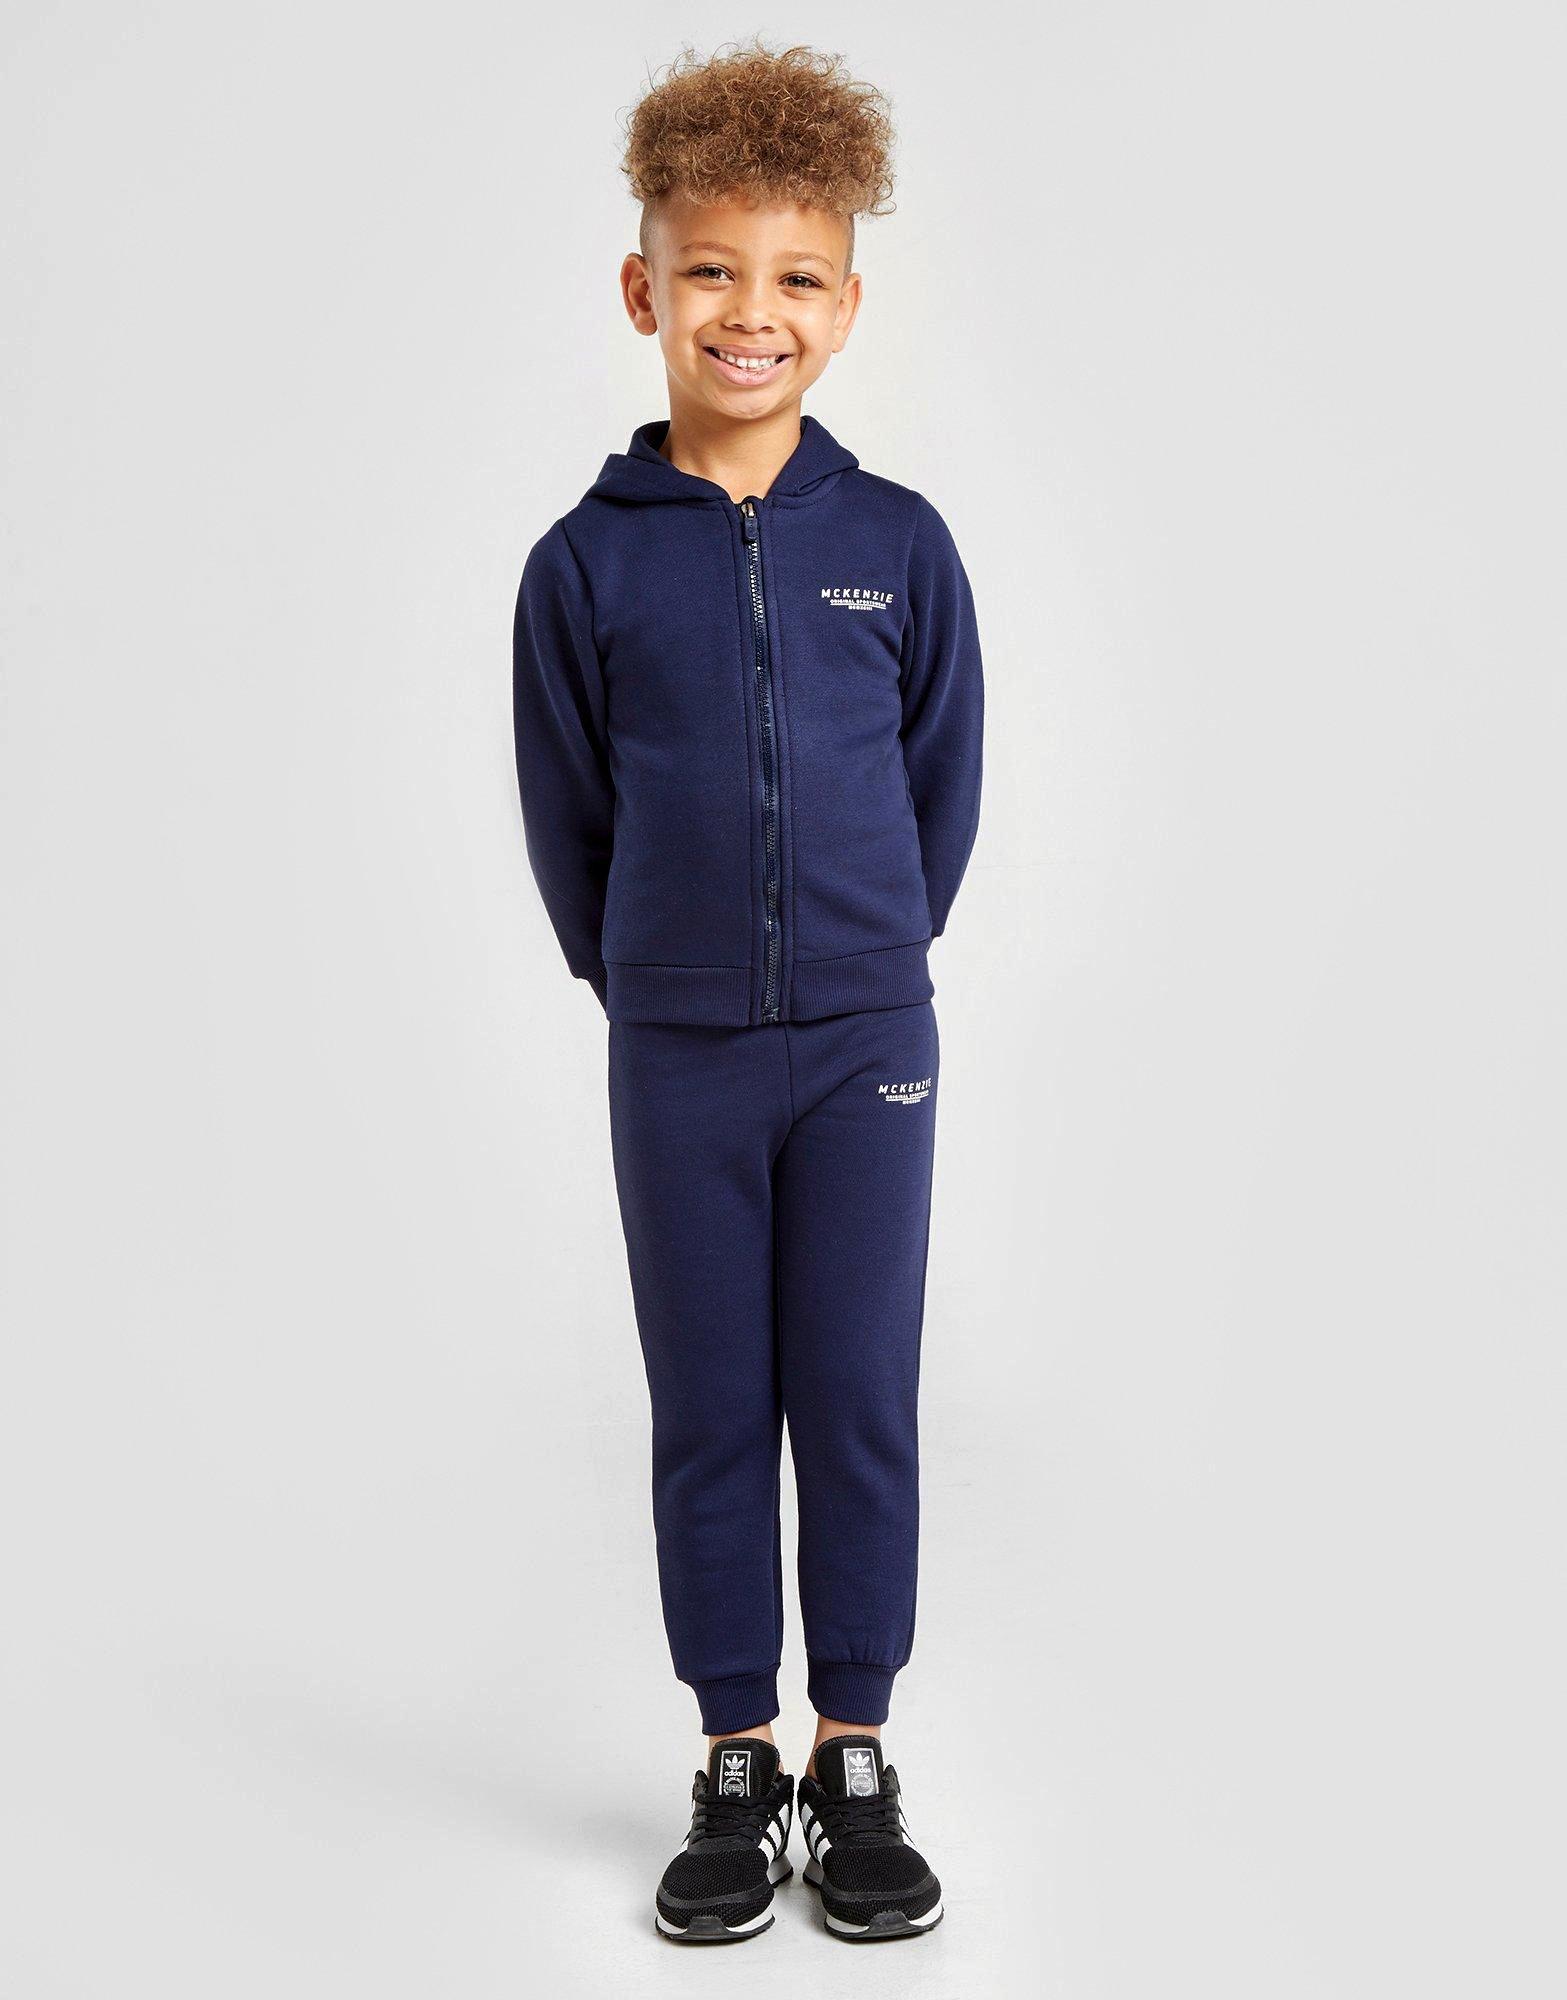 New McKenzie Boys’ Essential Full Zip Tracksuit from JD Outlet | eBay